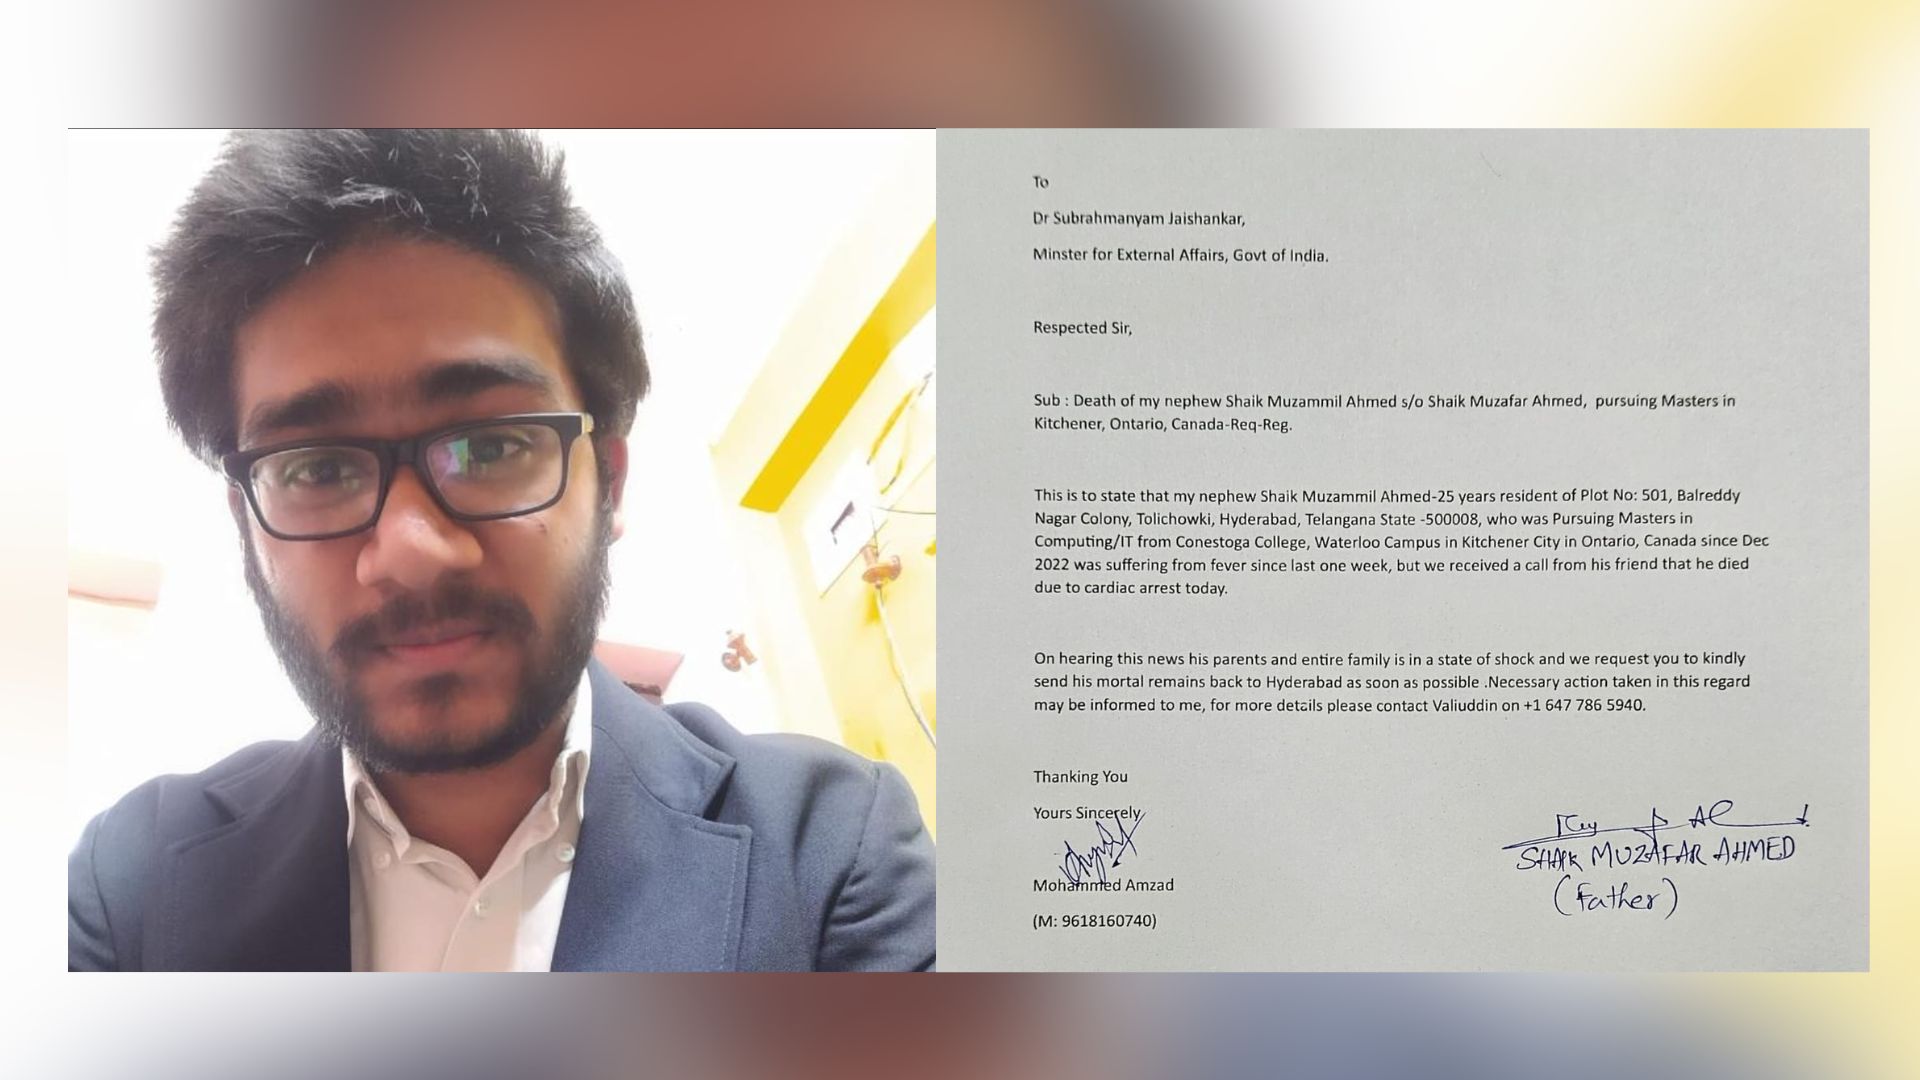 Indian Student Dies in Canada, Family Seeks Help from Indian Government